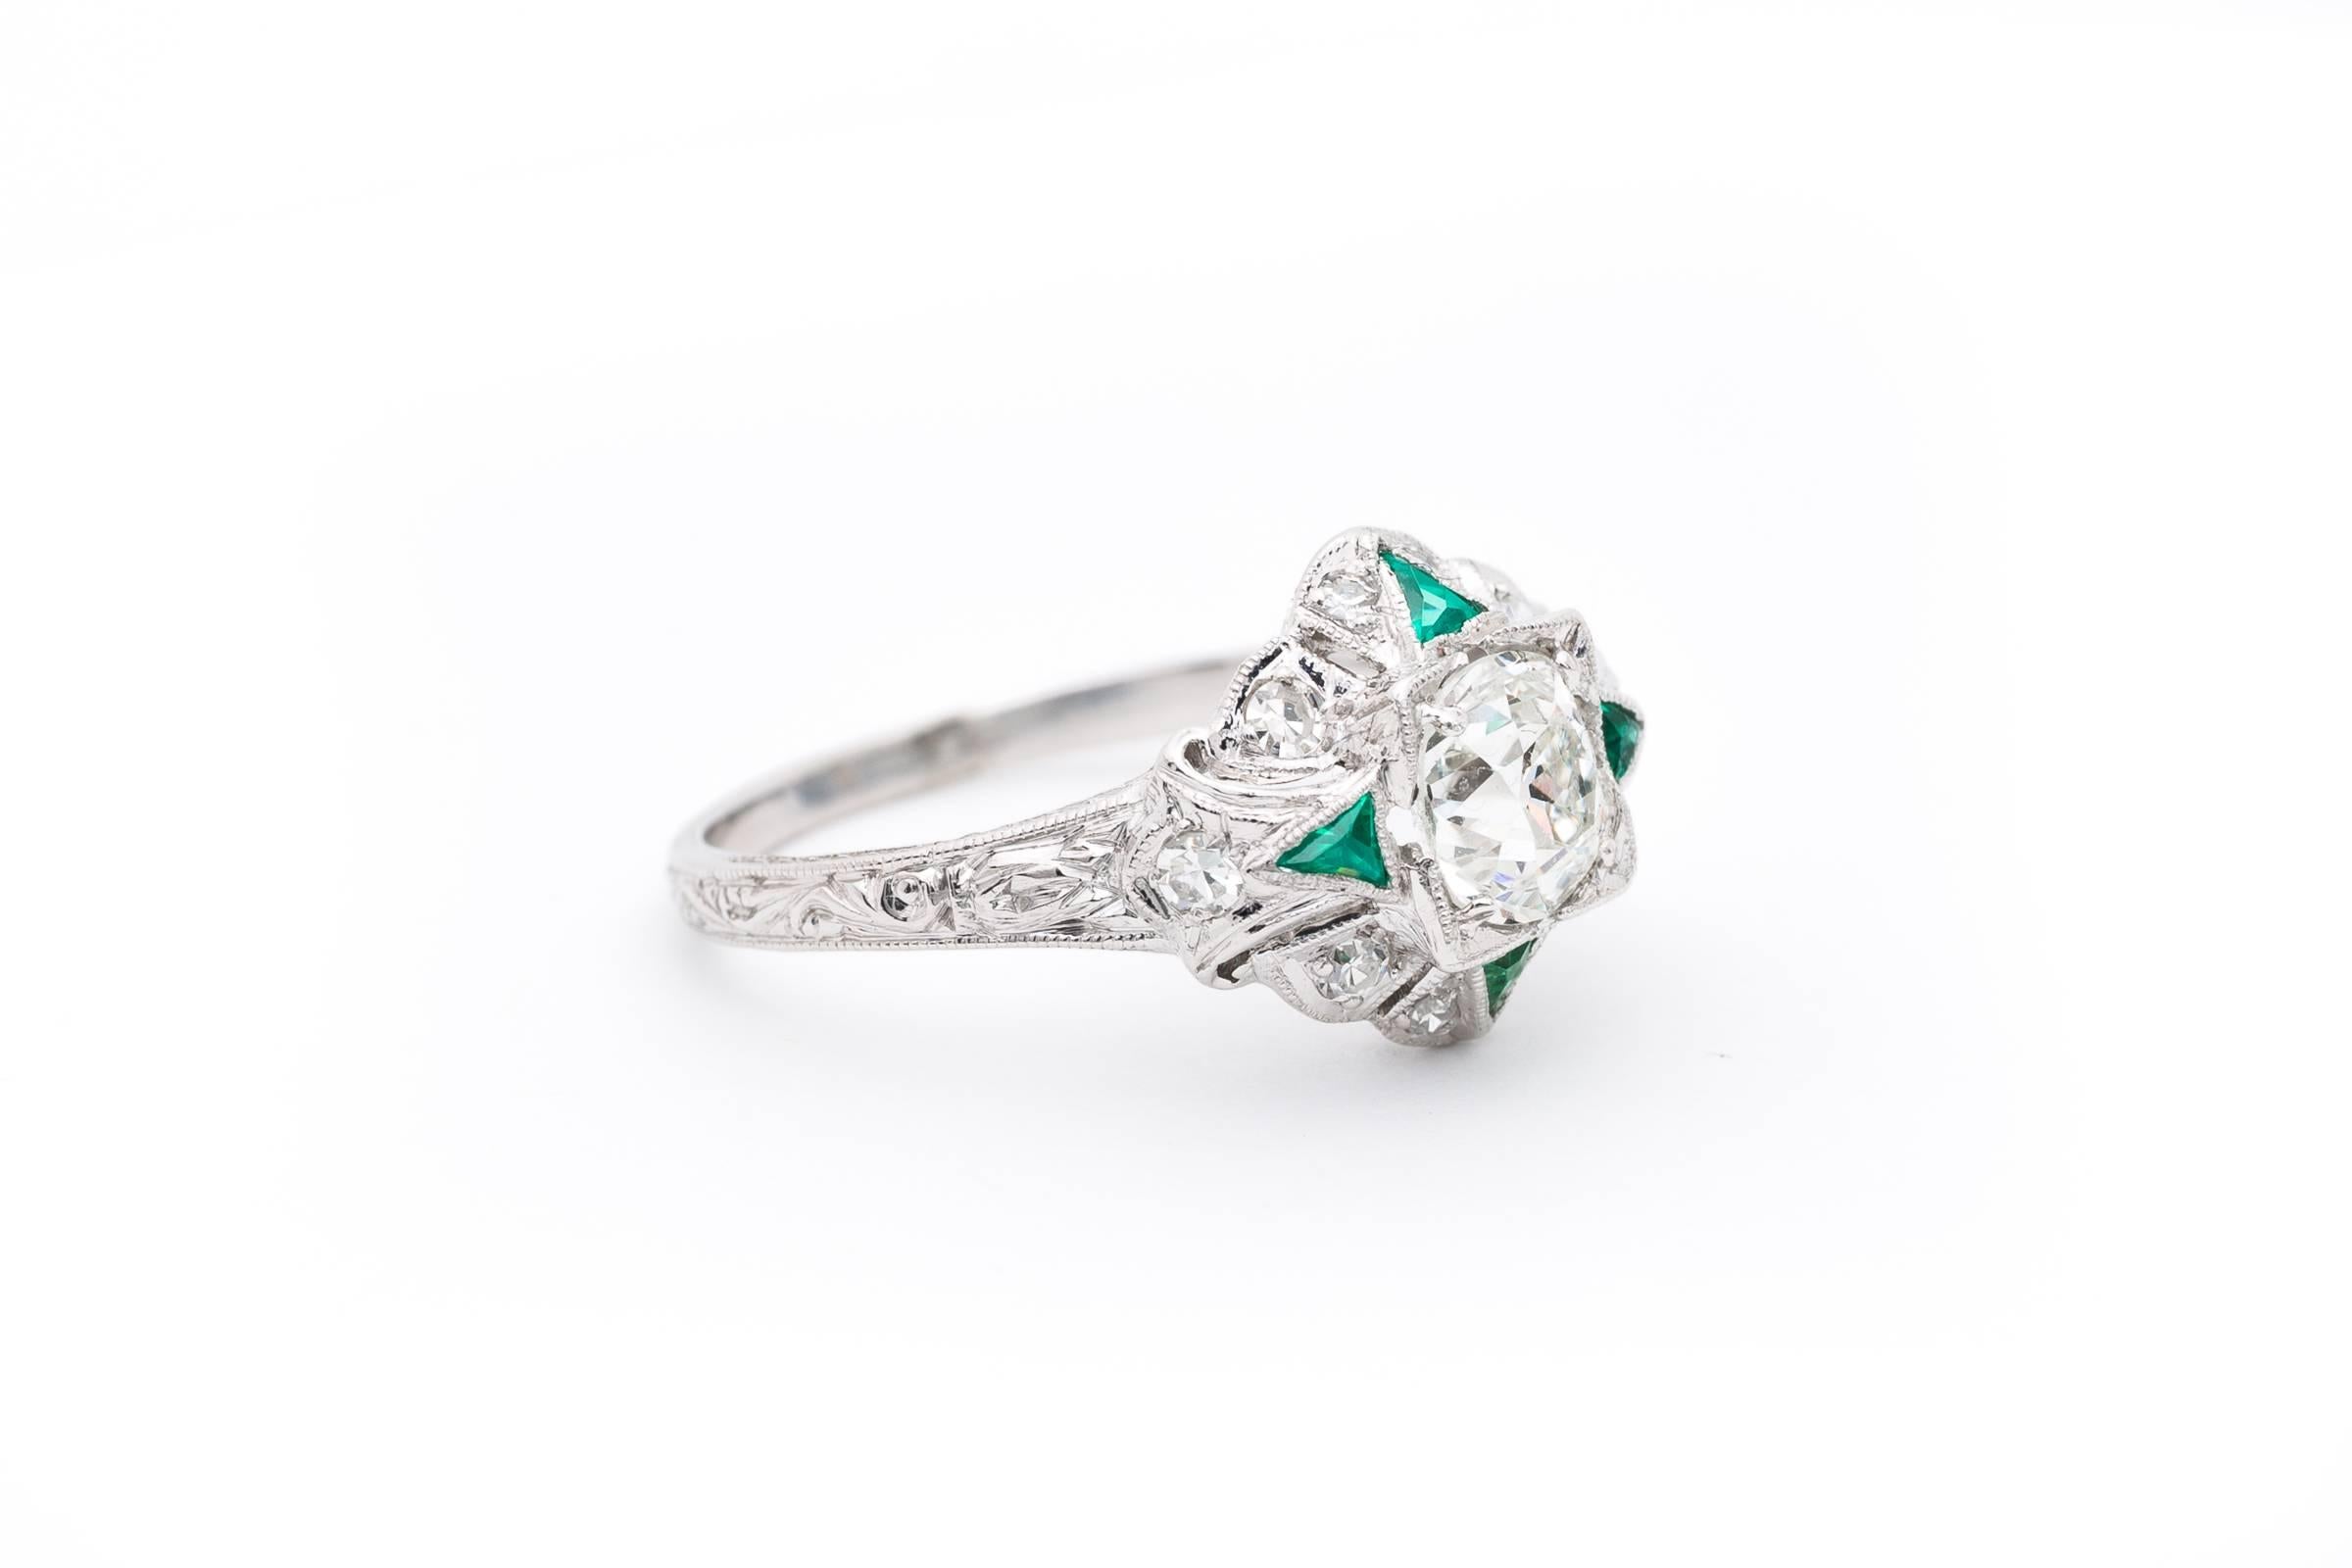 A true original art deco period masterpiece, this stunning ring features elaborate hand engraving throughout the beautiful hand crafted solid platinum mounting. Centered by a high quality 0.95 carat GIA Certified  diamond, the mounting is accented